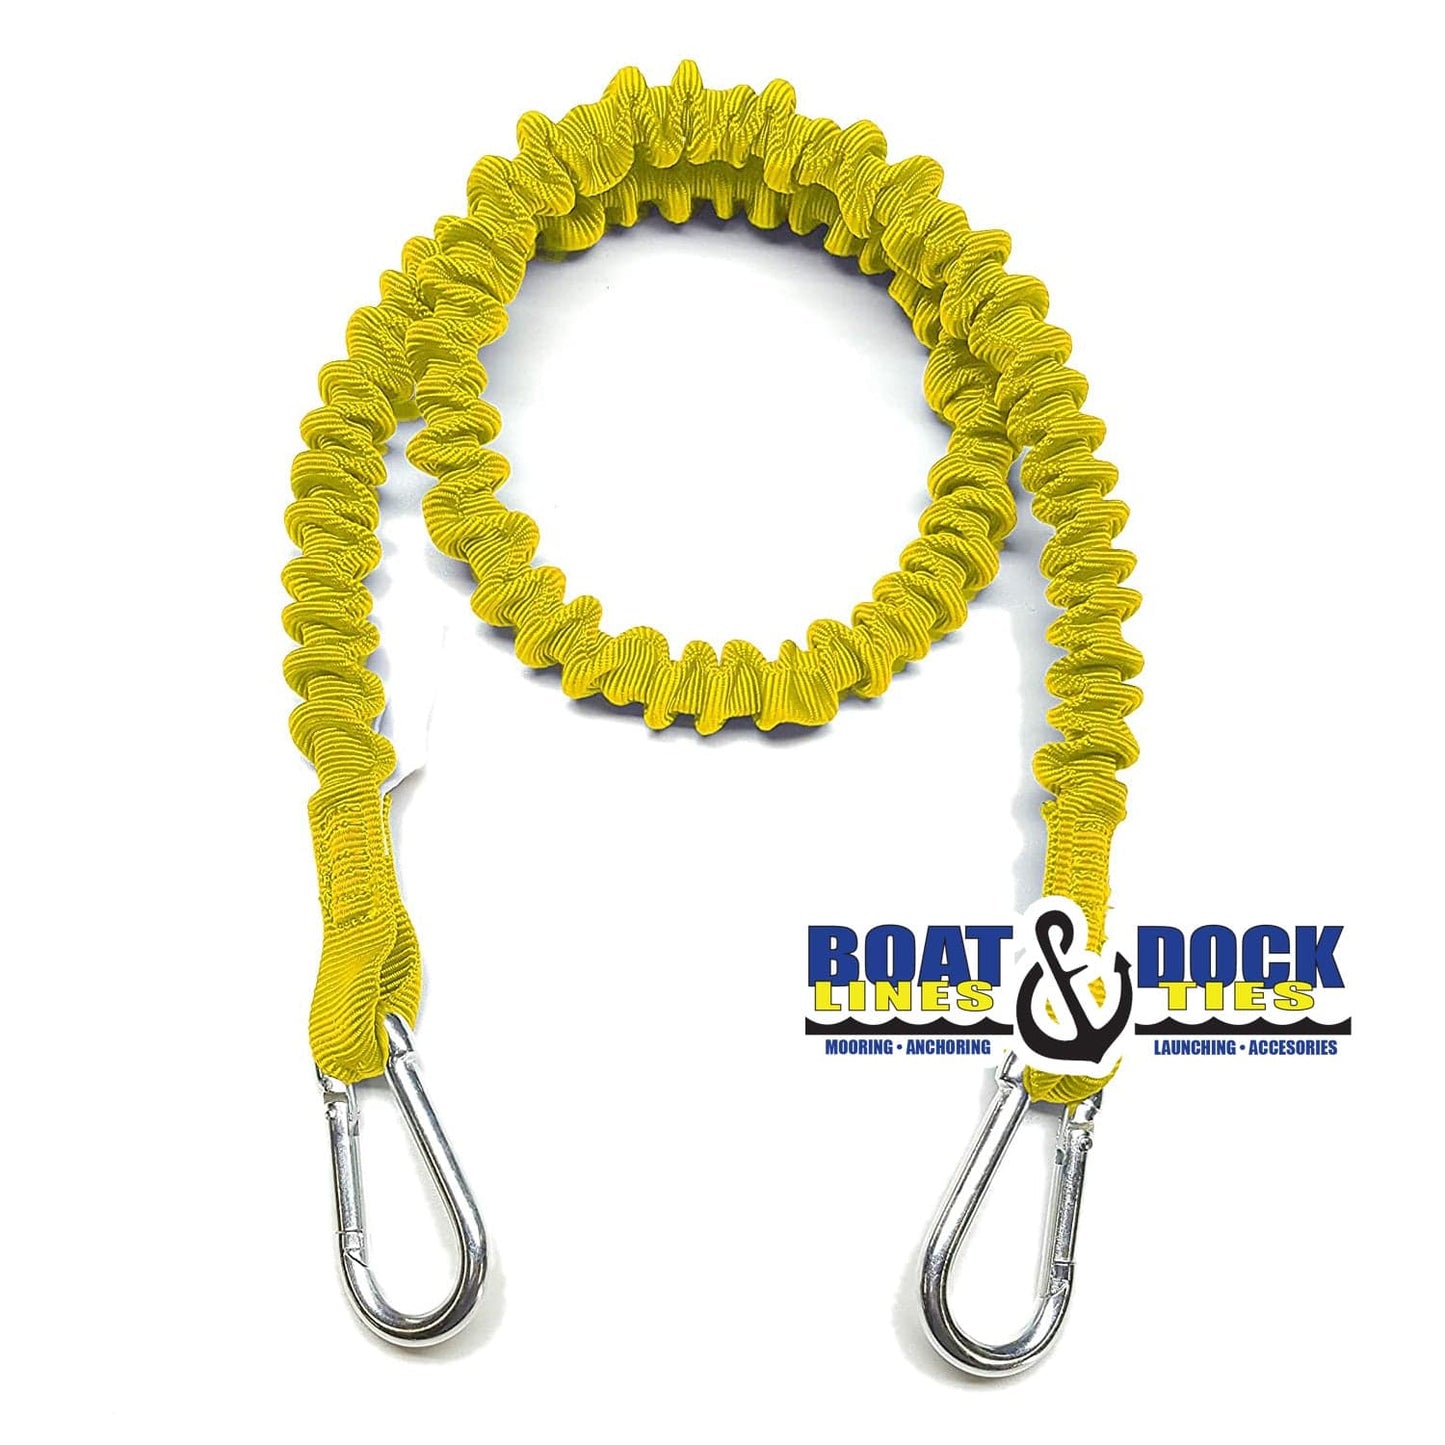 Boat Dock Tie Bungee Cords, 2 Hooked Ends, UV Protected Bungee Cords - Set of 2 - Made in USA - Boat Lines & Dock Ties Boat Lines & Dock Ties 48" / Yellow